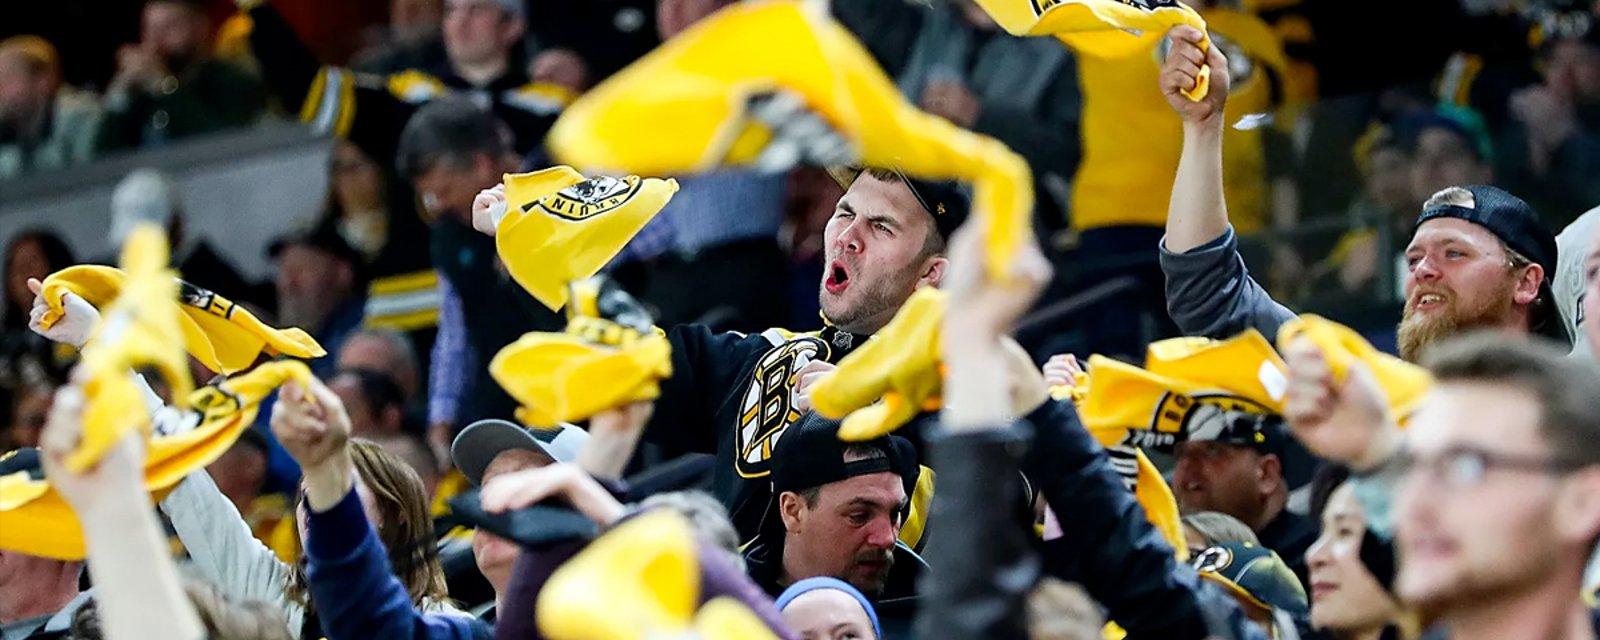 Game 7 ticket prices at TD Garden hit new record high